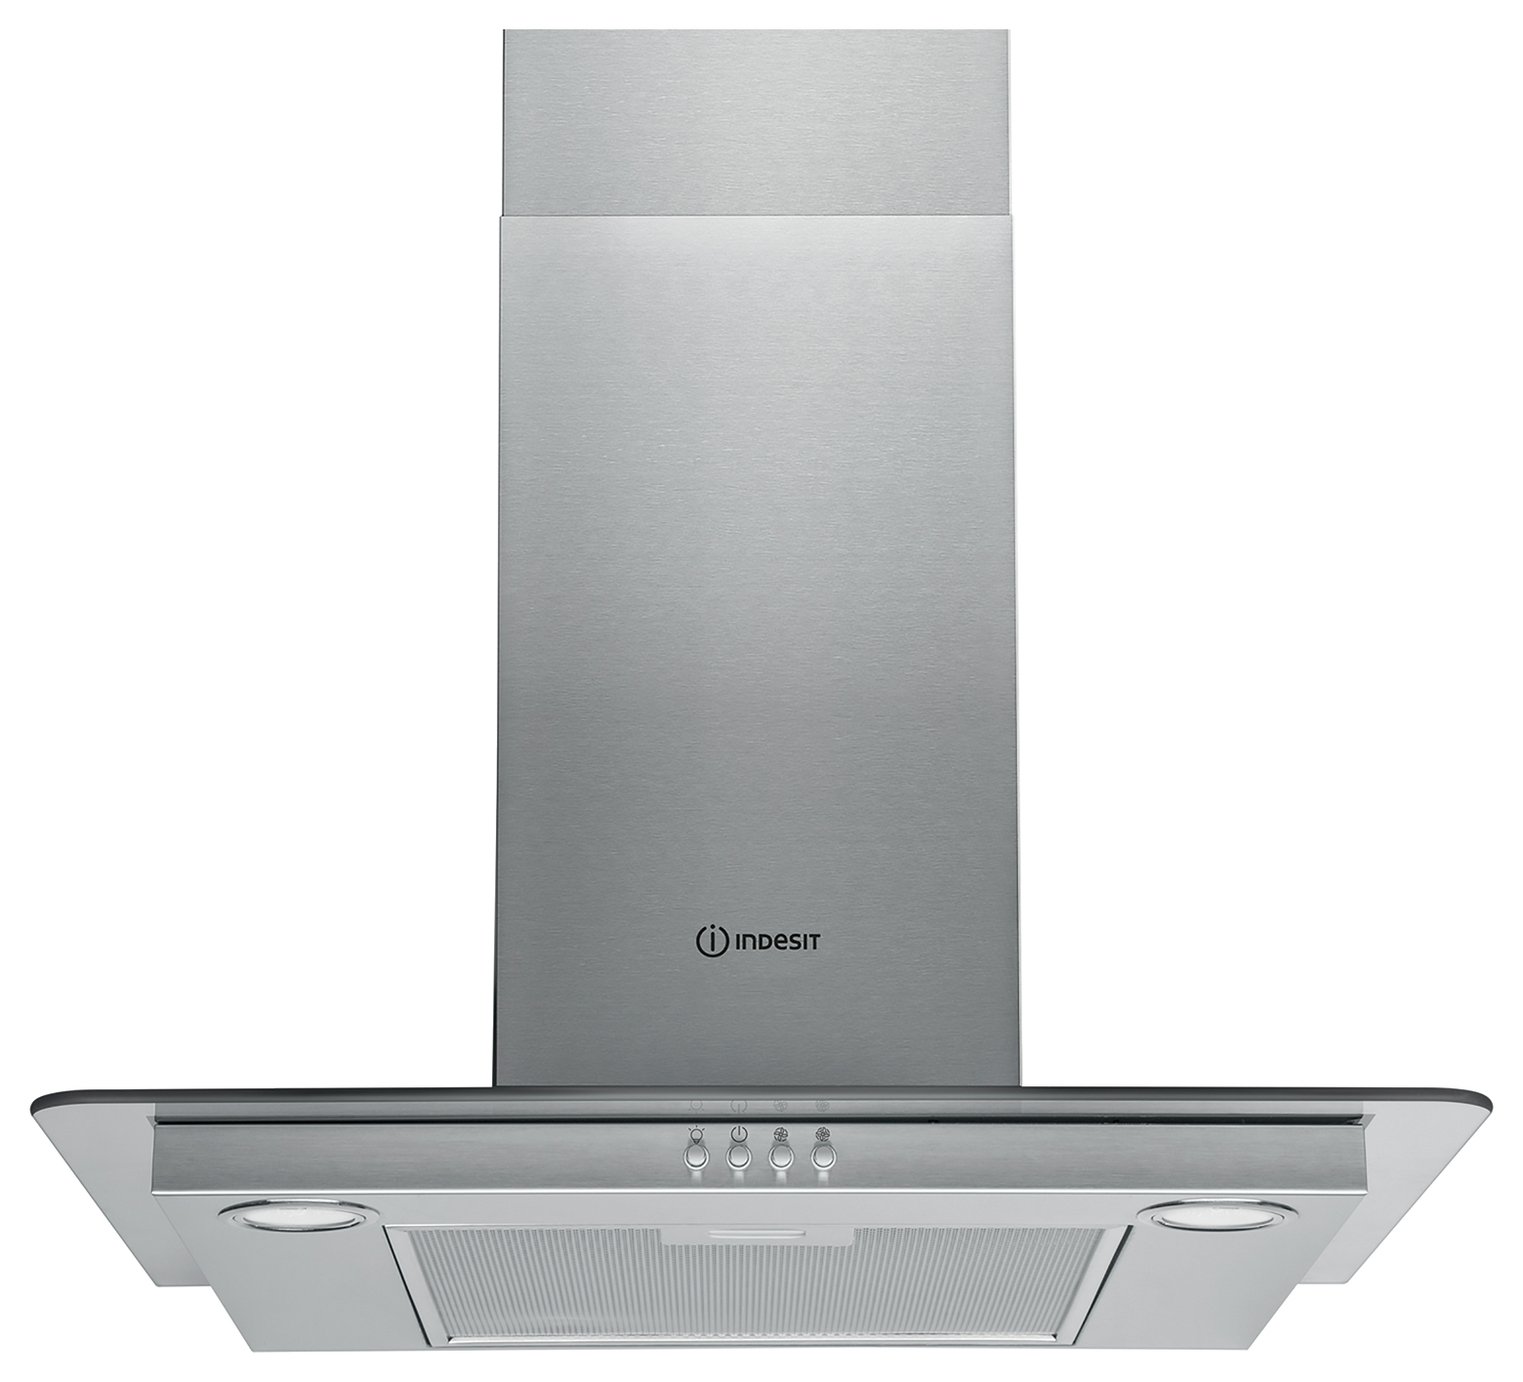 Indesit IHF6.5LMX 60cm Cooker Hood - Stainless Steel